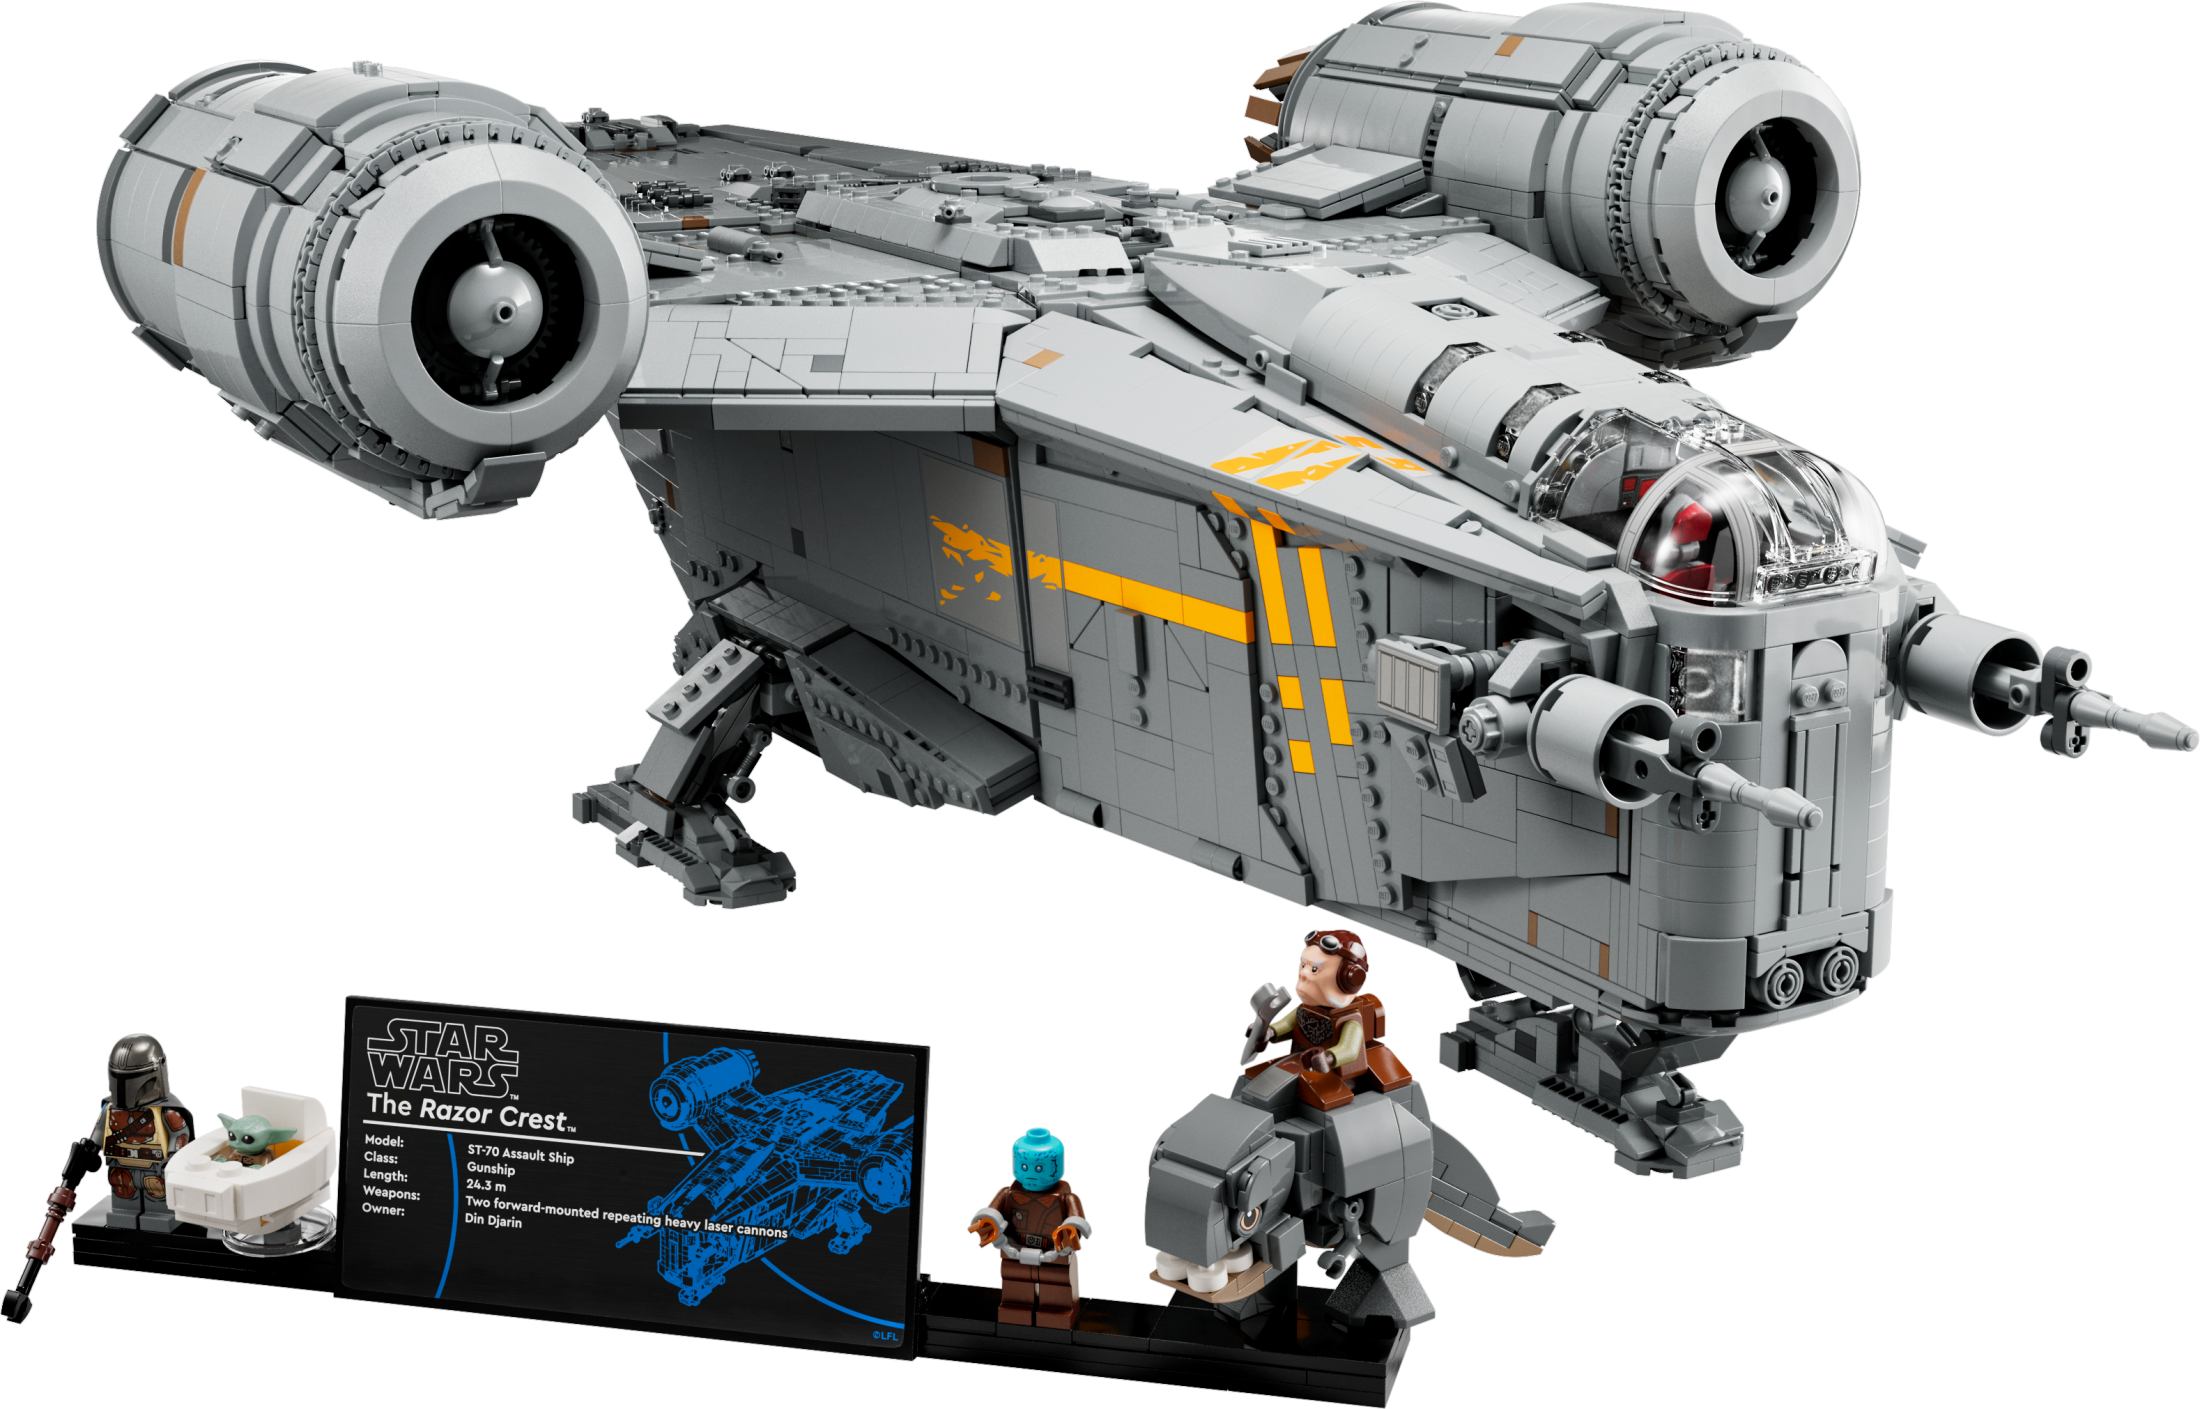 LEGO Star Wars The Razor Crest UCS Starship Set, May the 4th Collectible Model Kit for Adults, Iconic Mandalorian Memorabilia, Great Gift for Star Wars Fans, 75331 - image 5 of 9